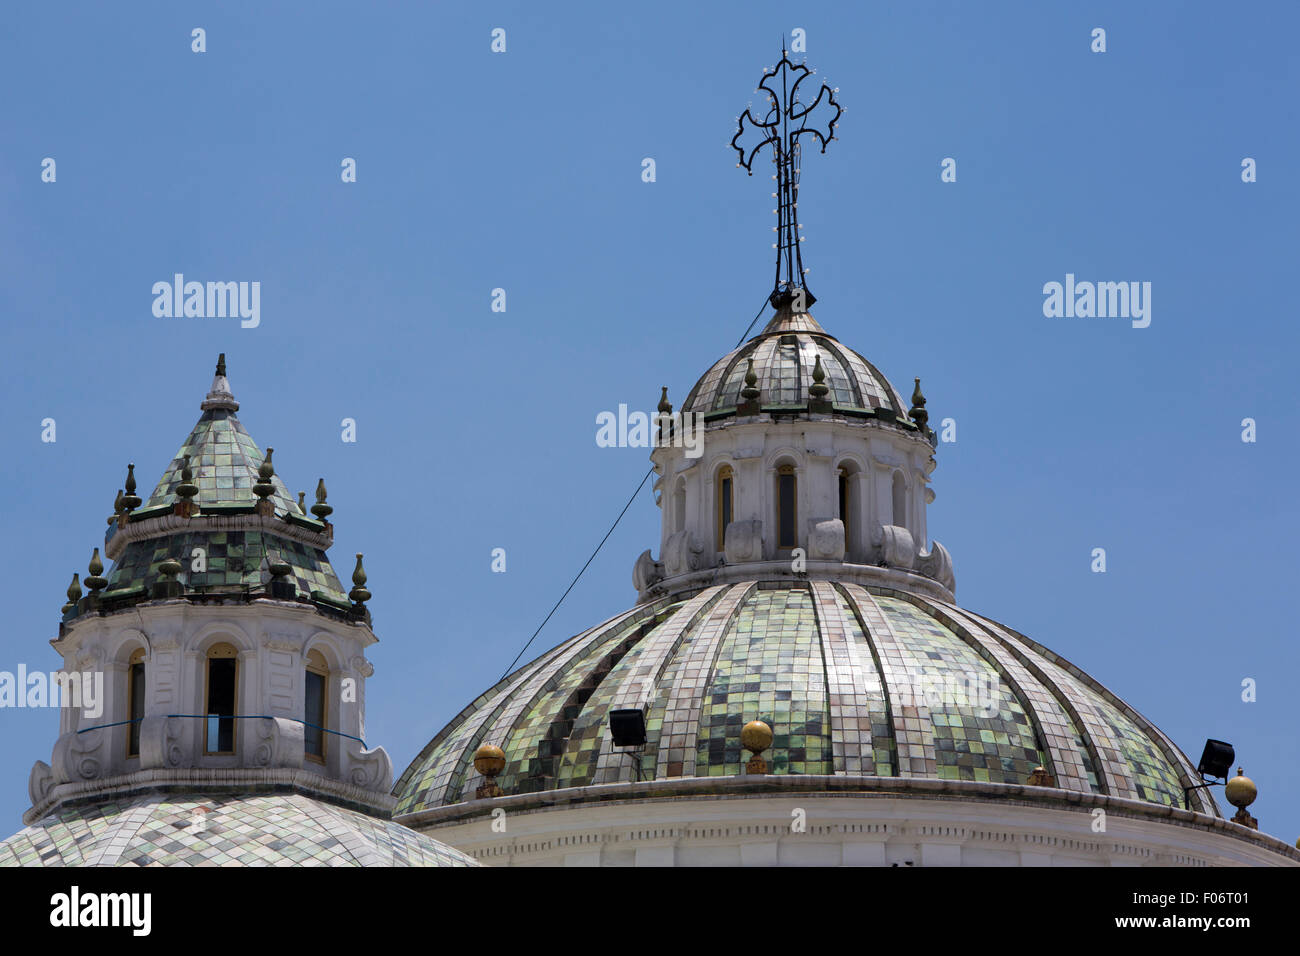 Metropolitan Cathedral of Quito in the Historic center early in the morning with blue clear sky, Quito, Ecuador 2015 Stock Photo